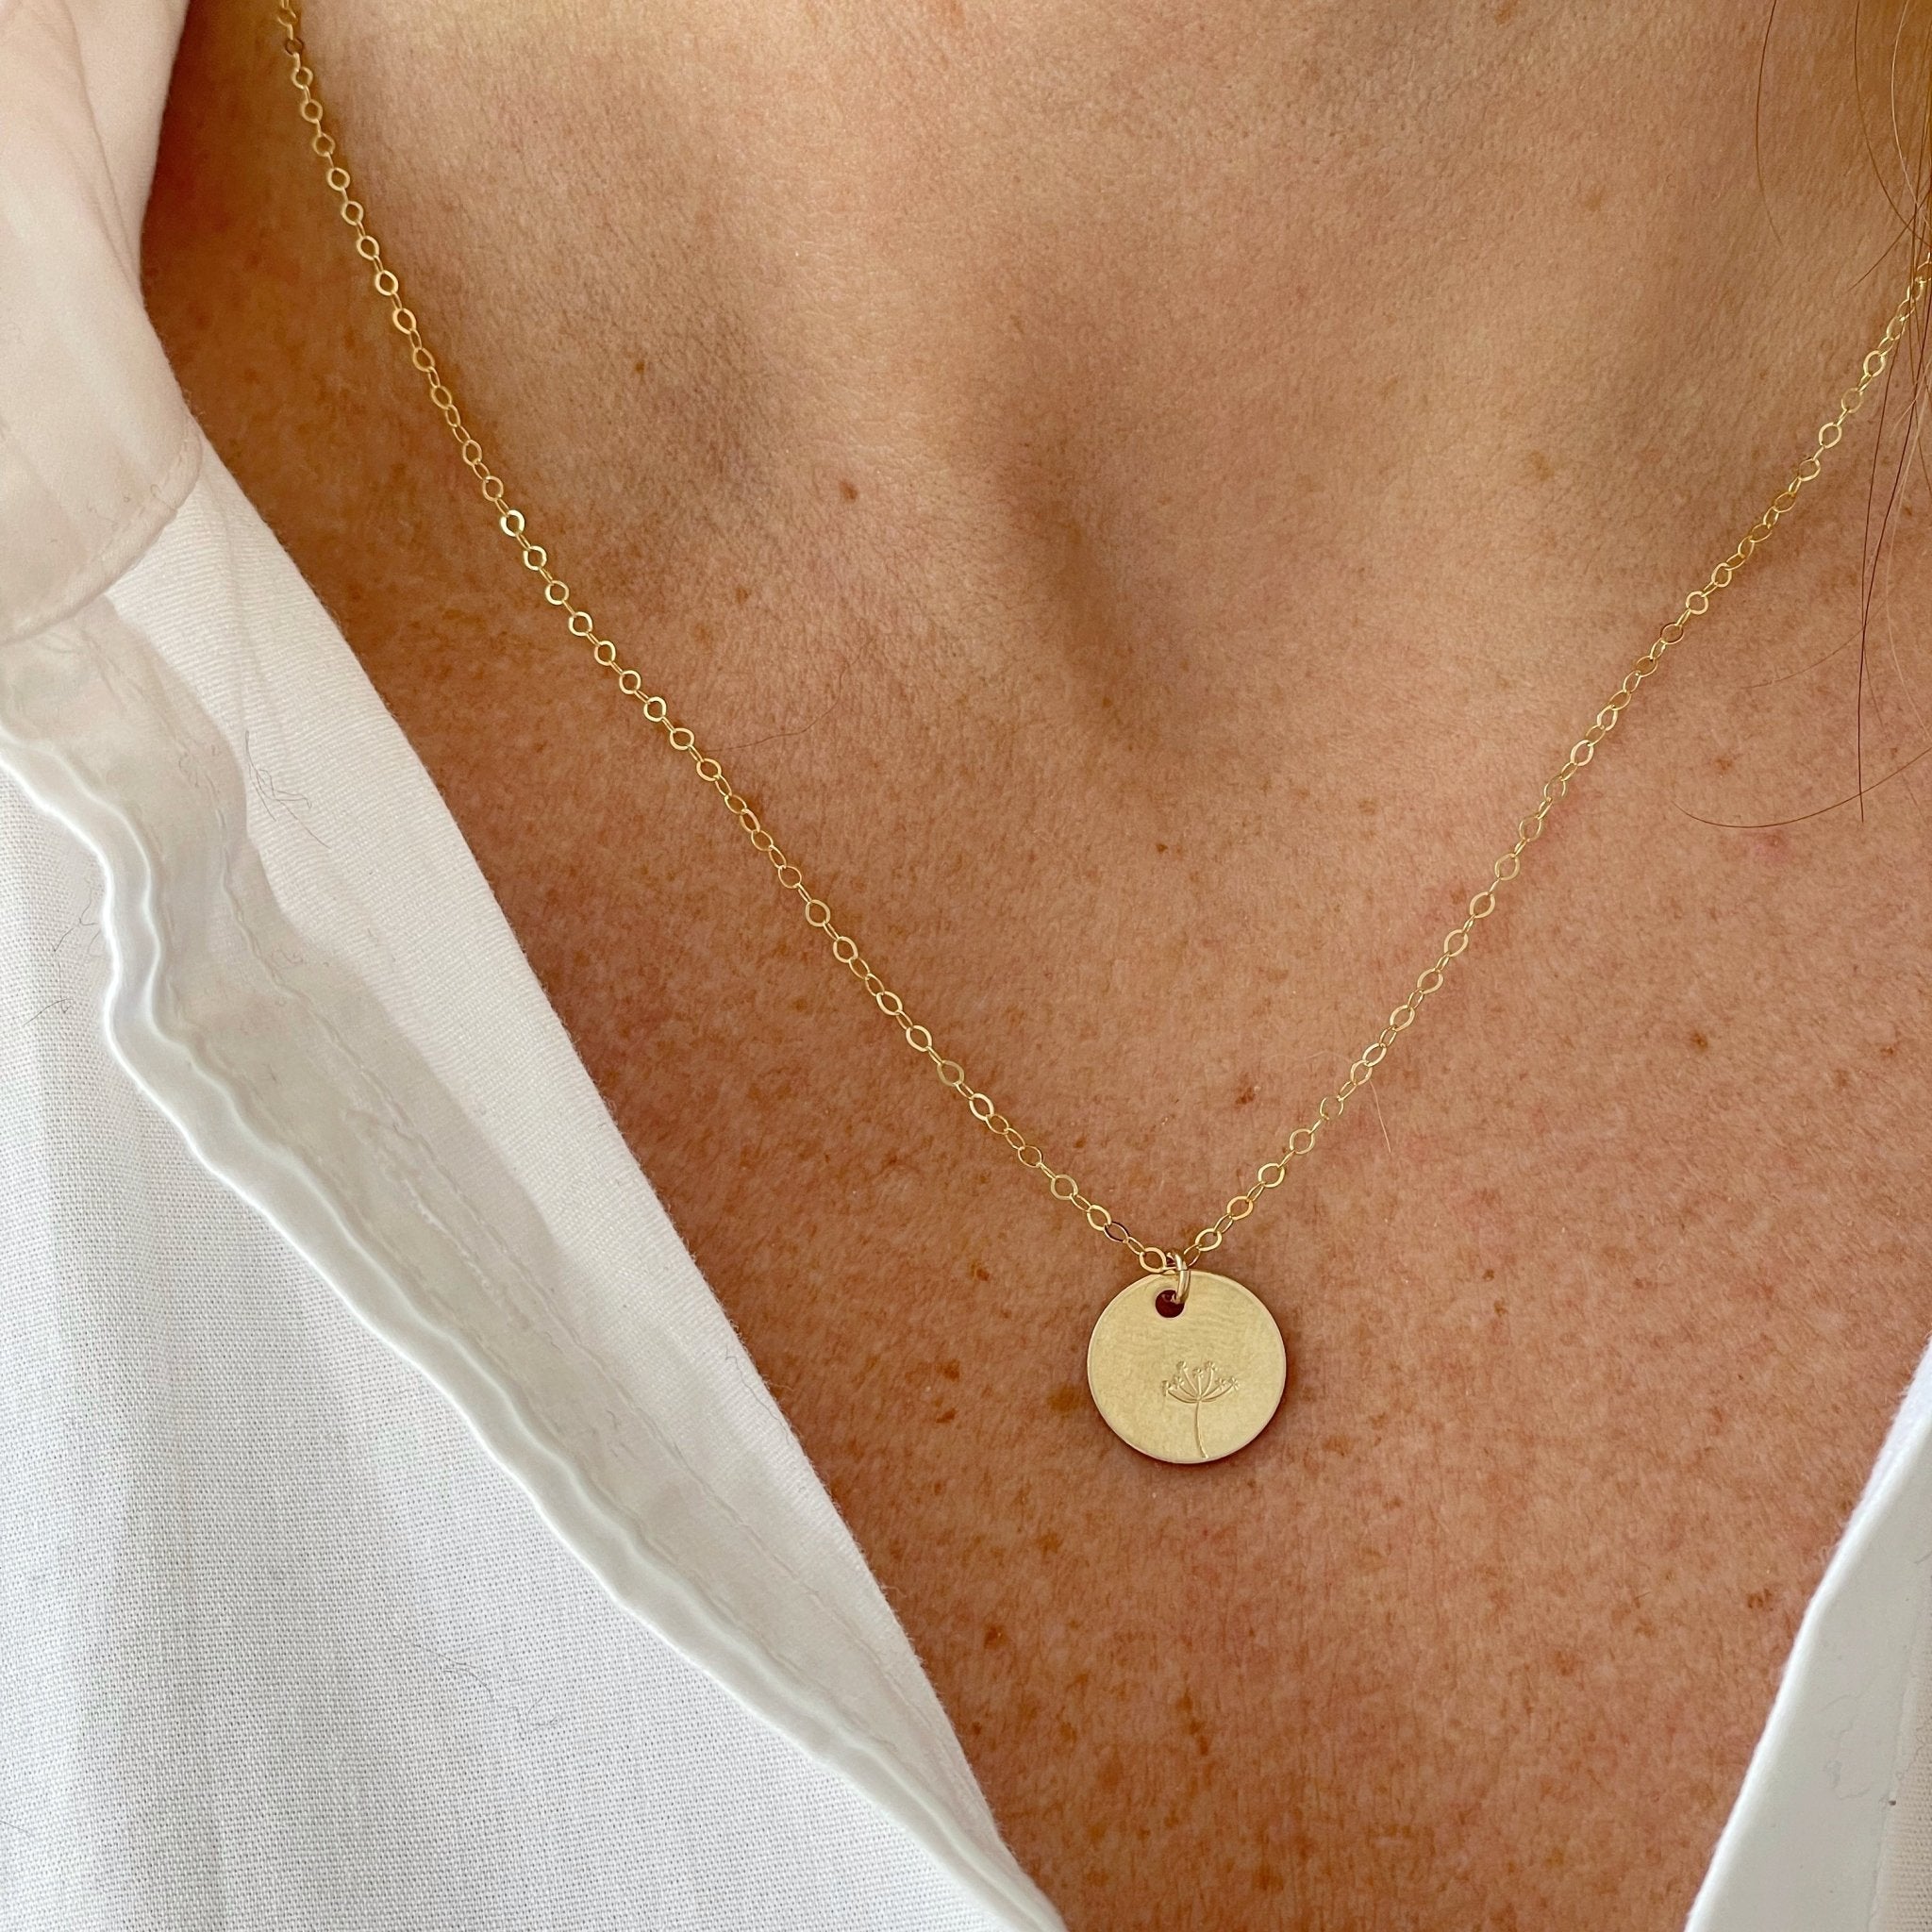 Close up of woman's neckline wearing white shirt with gold stamped disc dandelion seed miscarriage necklace. Seeds of Hope Necklace by Sarah Cornwell Jewelry